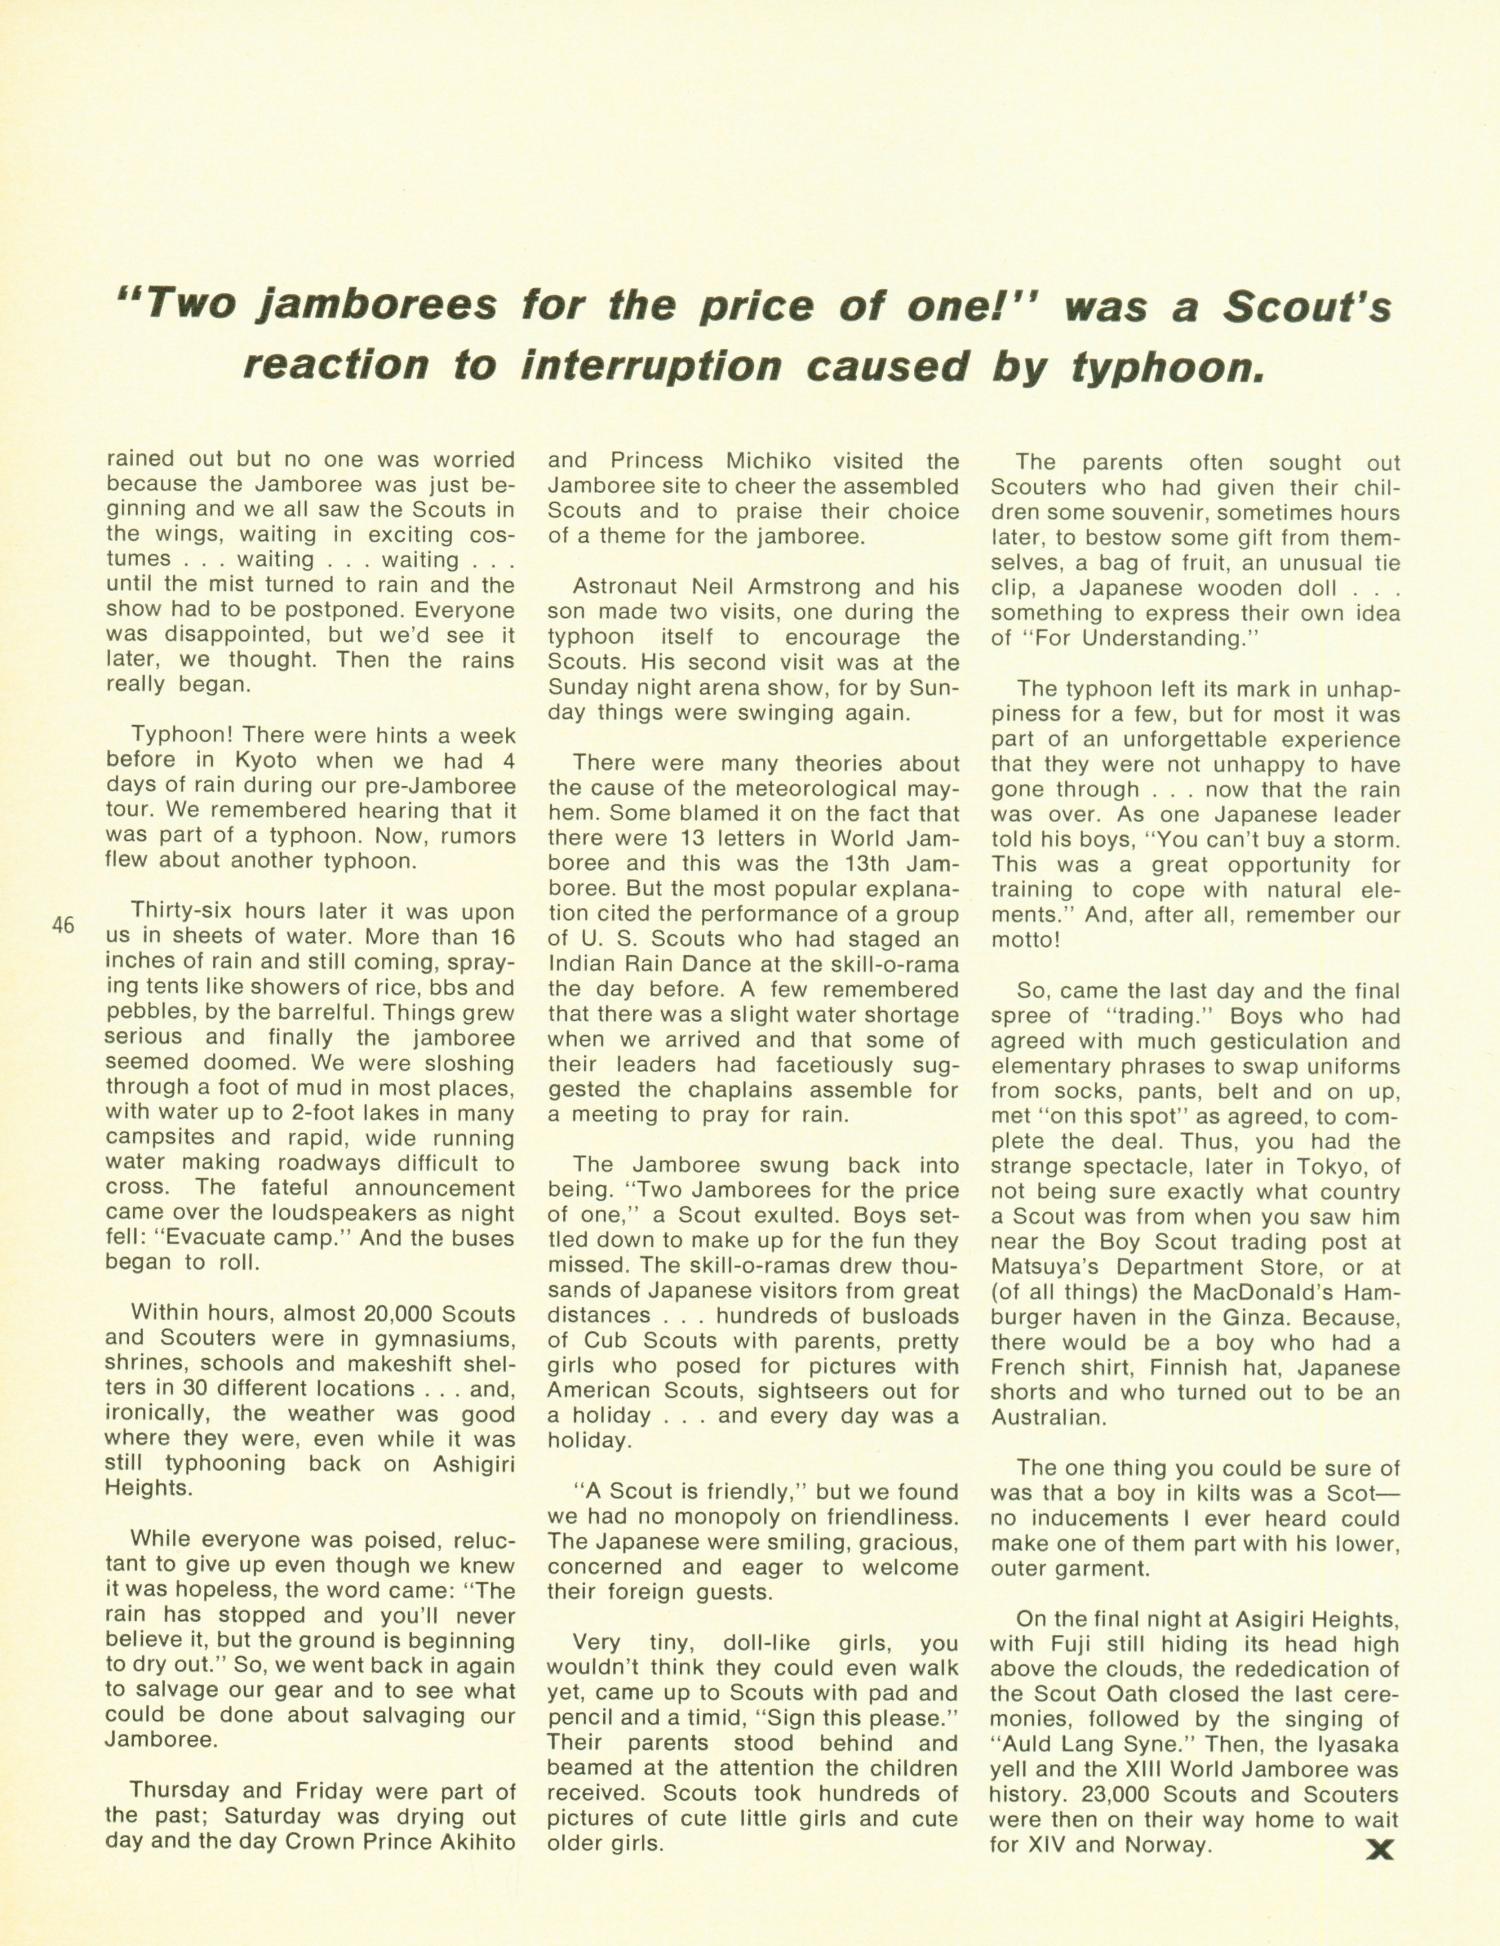 Scouting, Volume 60, Number 1, January-February 1972
                                                
                                                    46
                                                